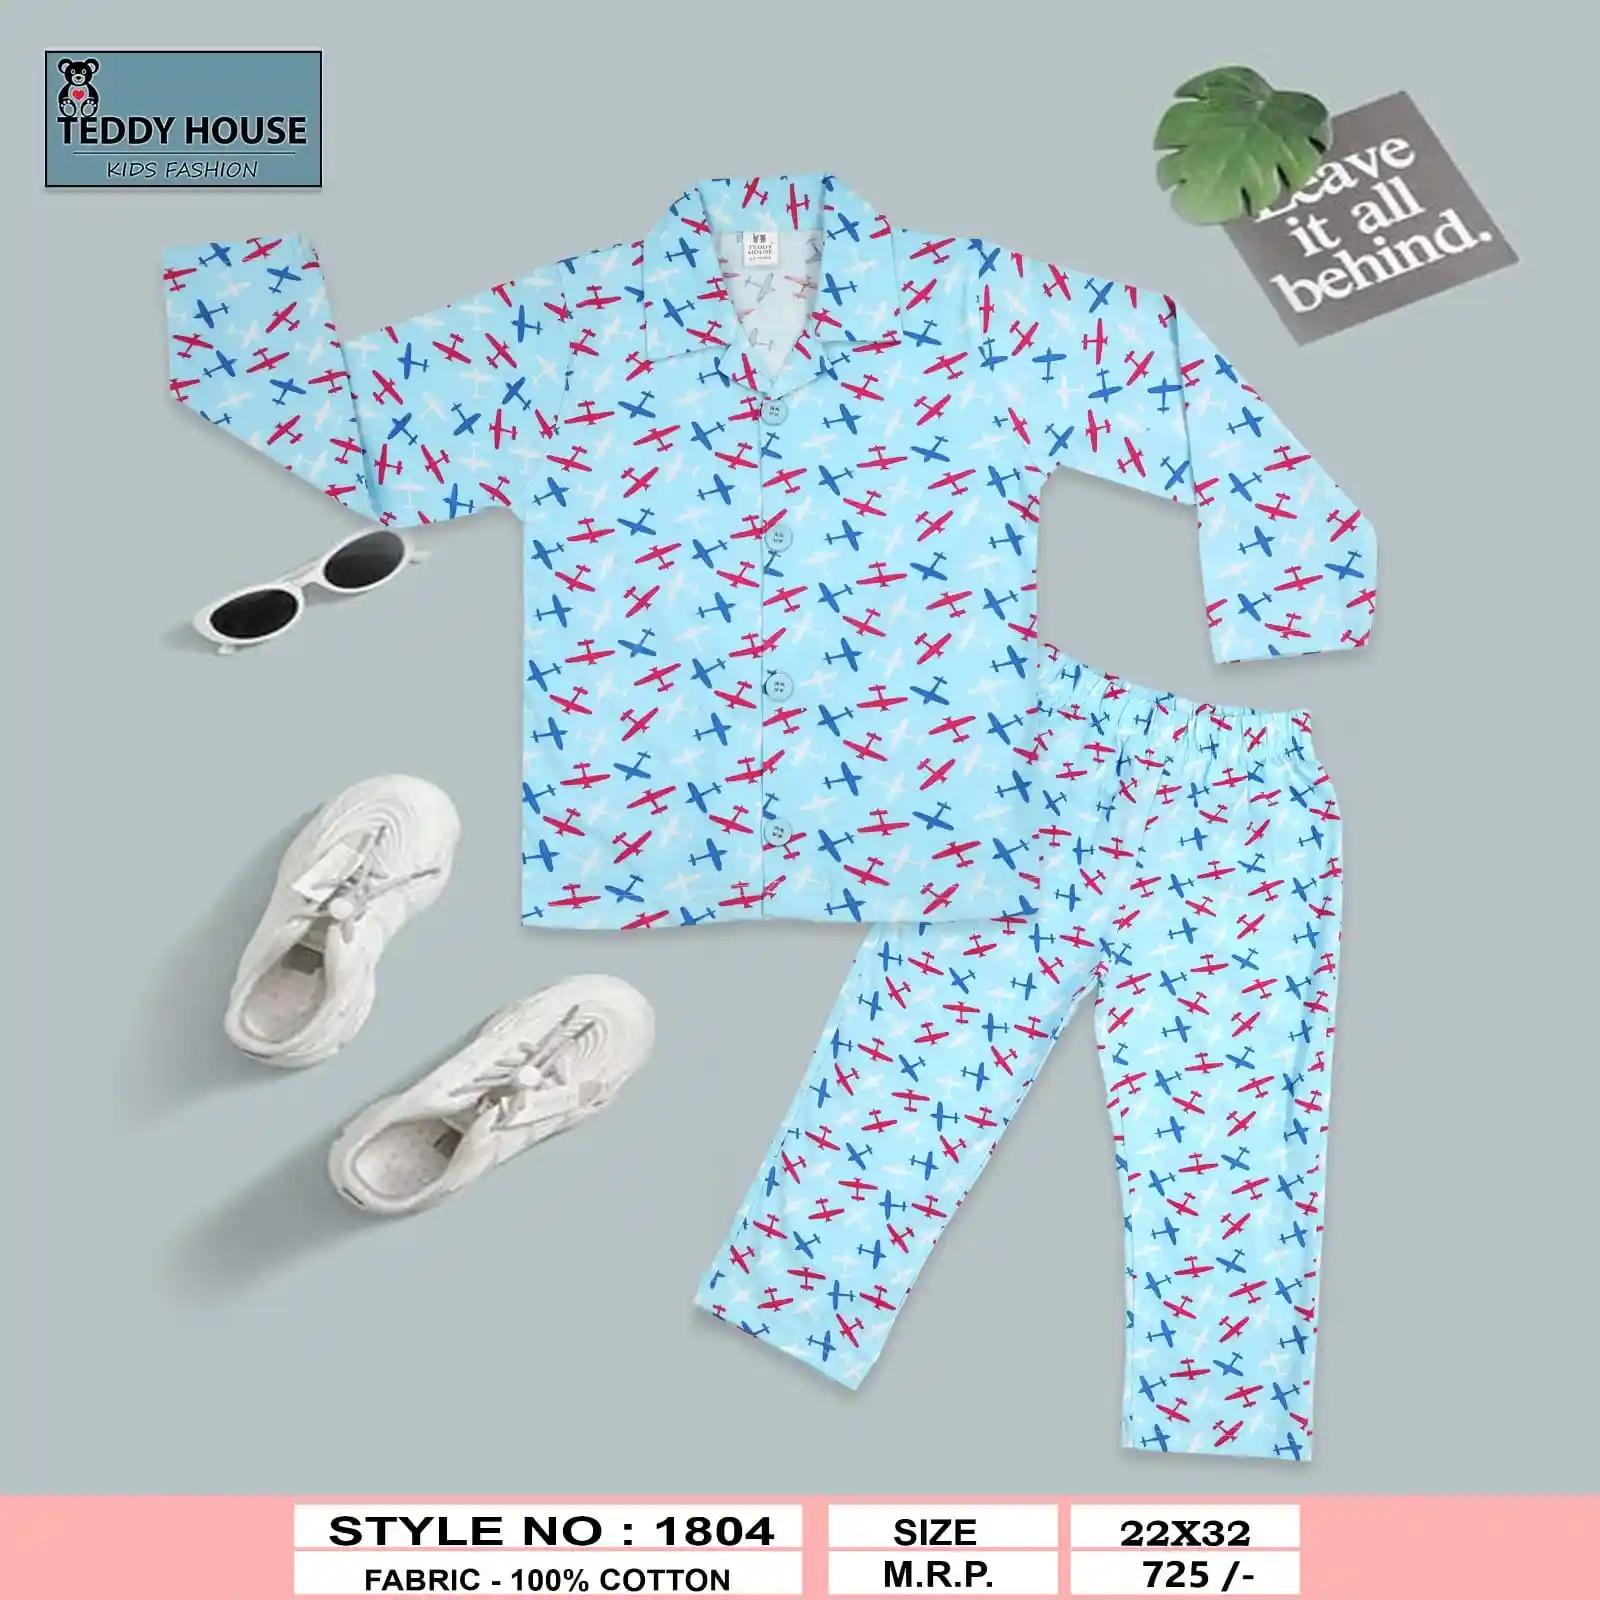 The Ultimate Guide to Choosing the Perfect Baby Night Suit